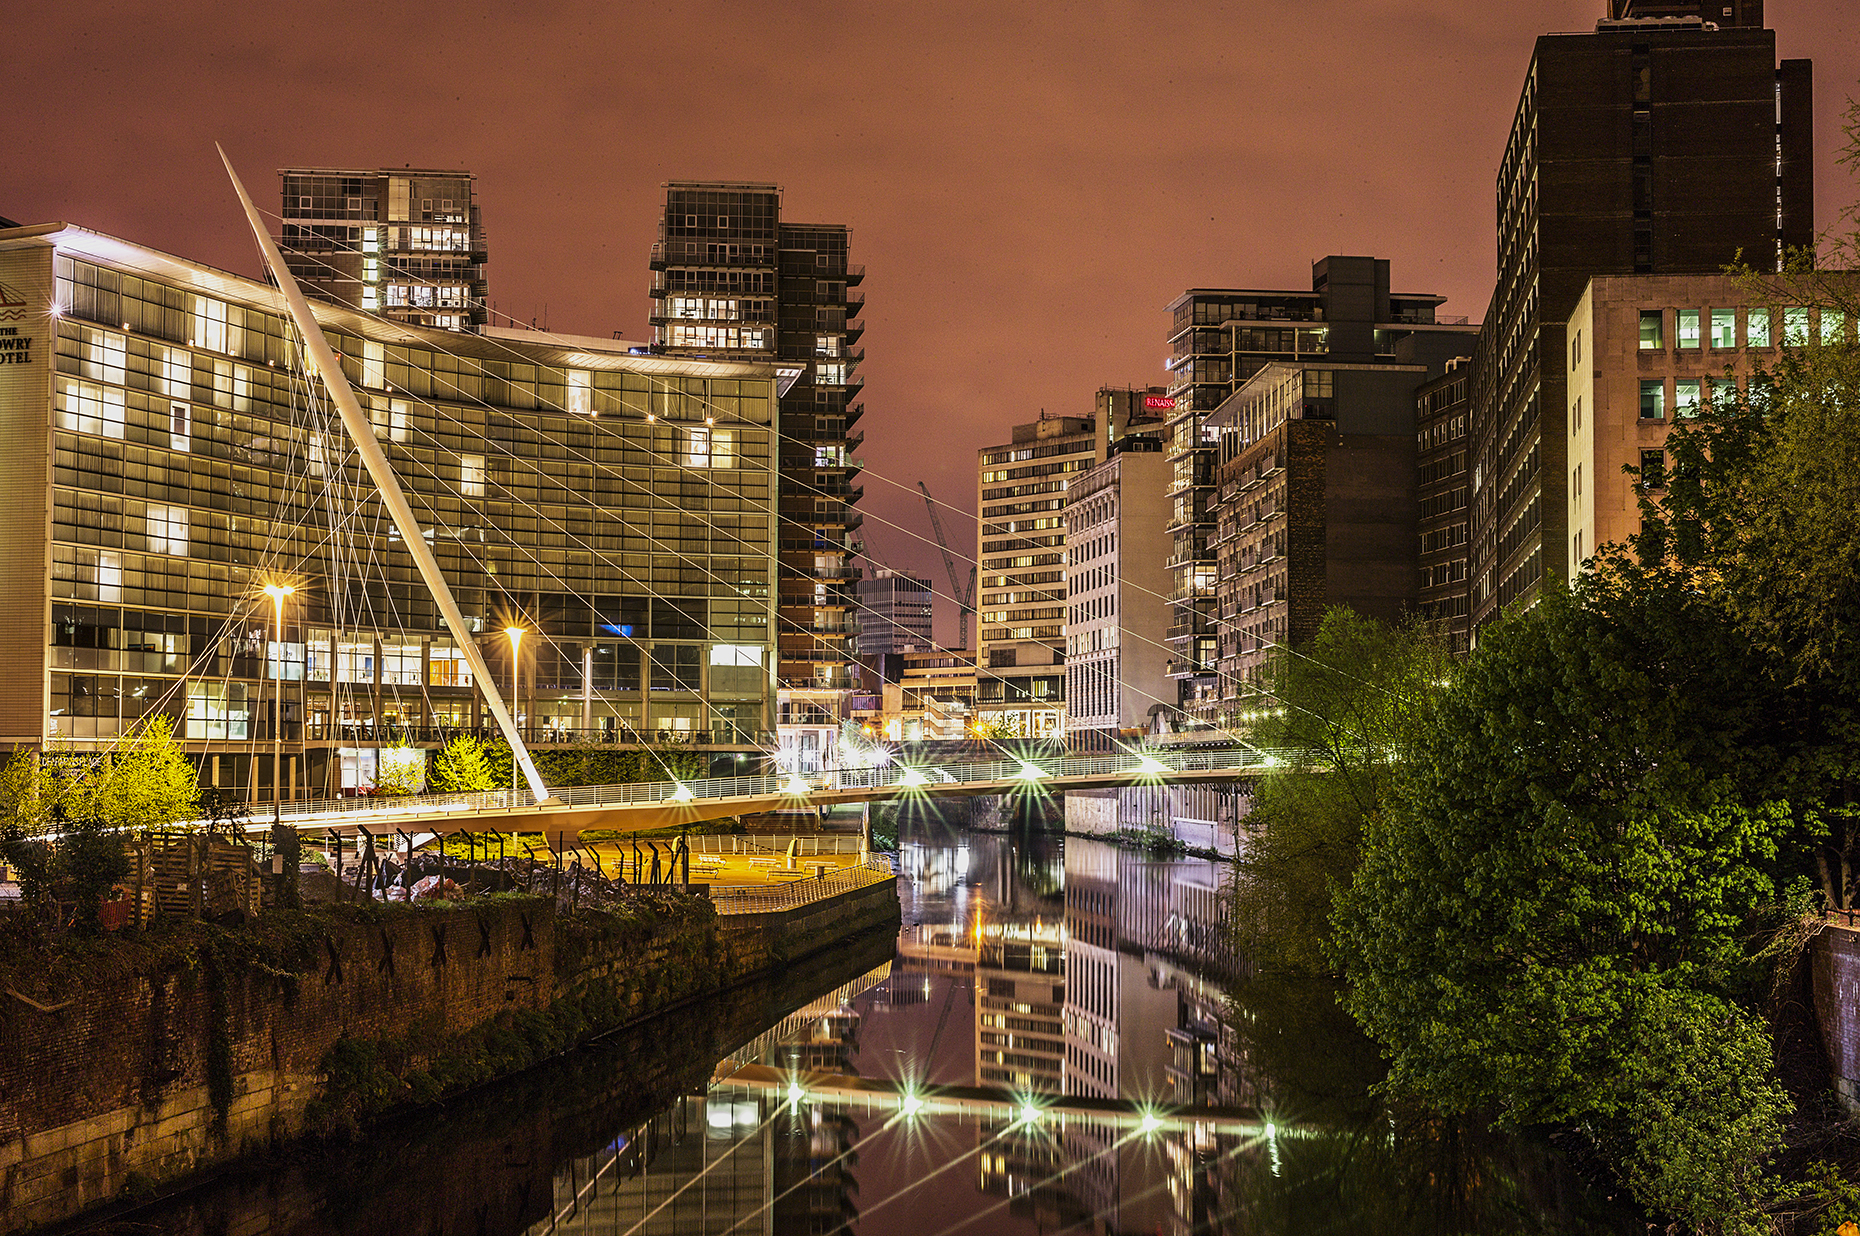 Cities at Night - Manchester